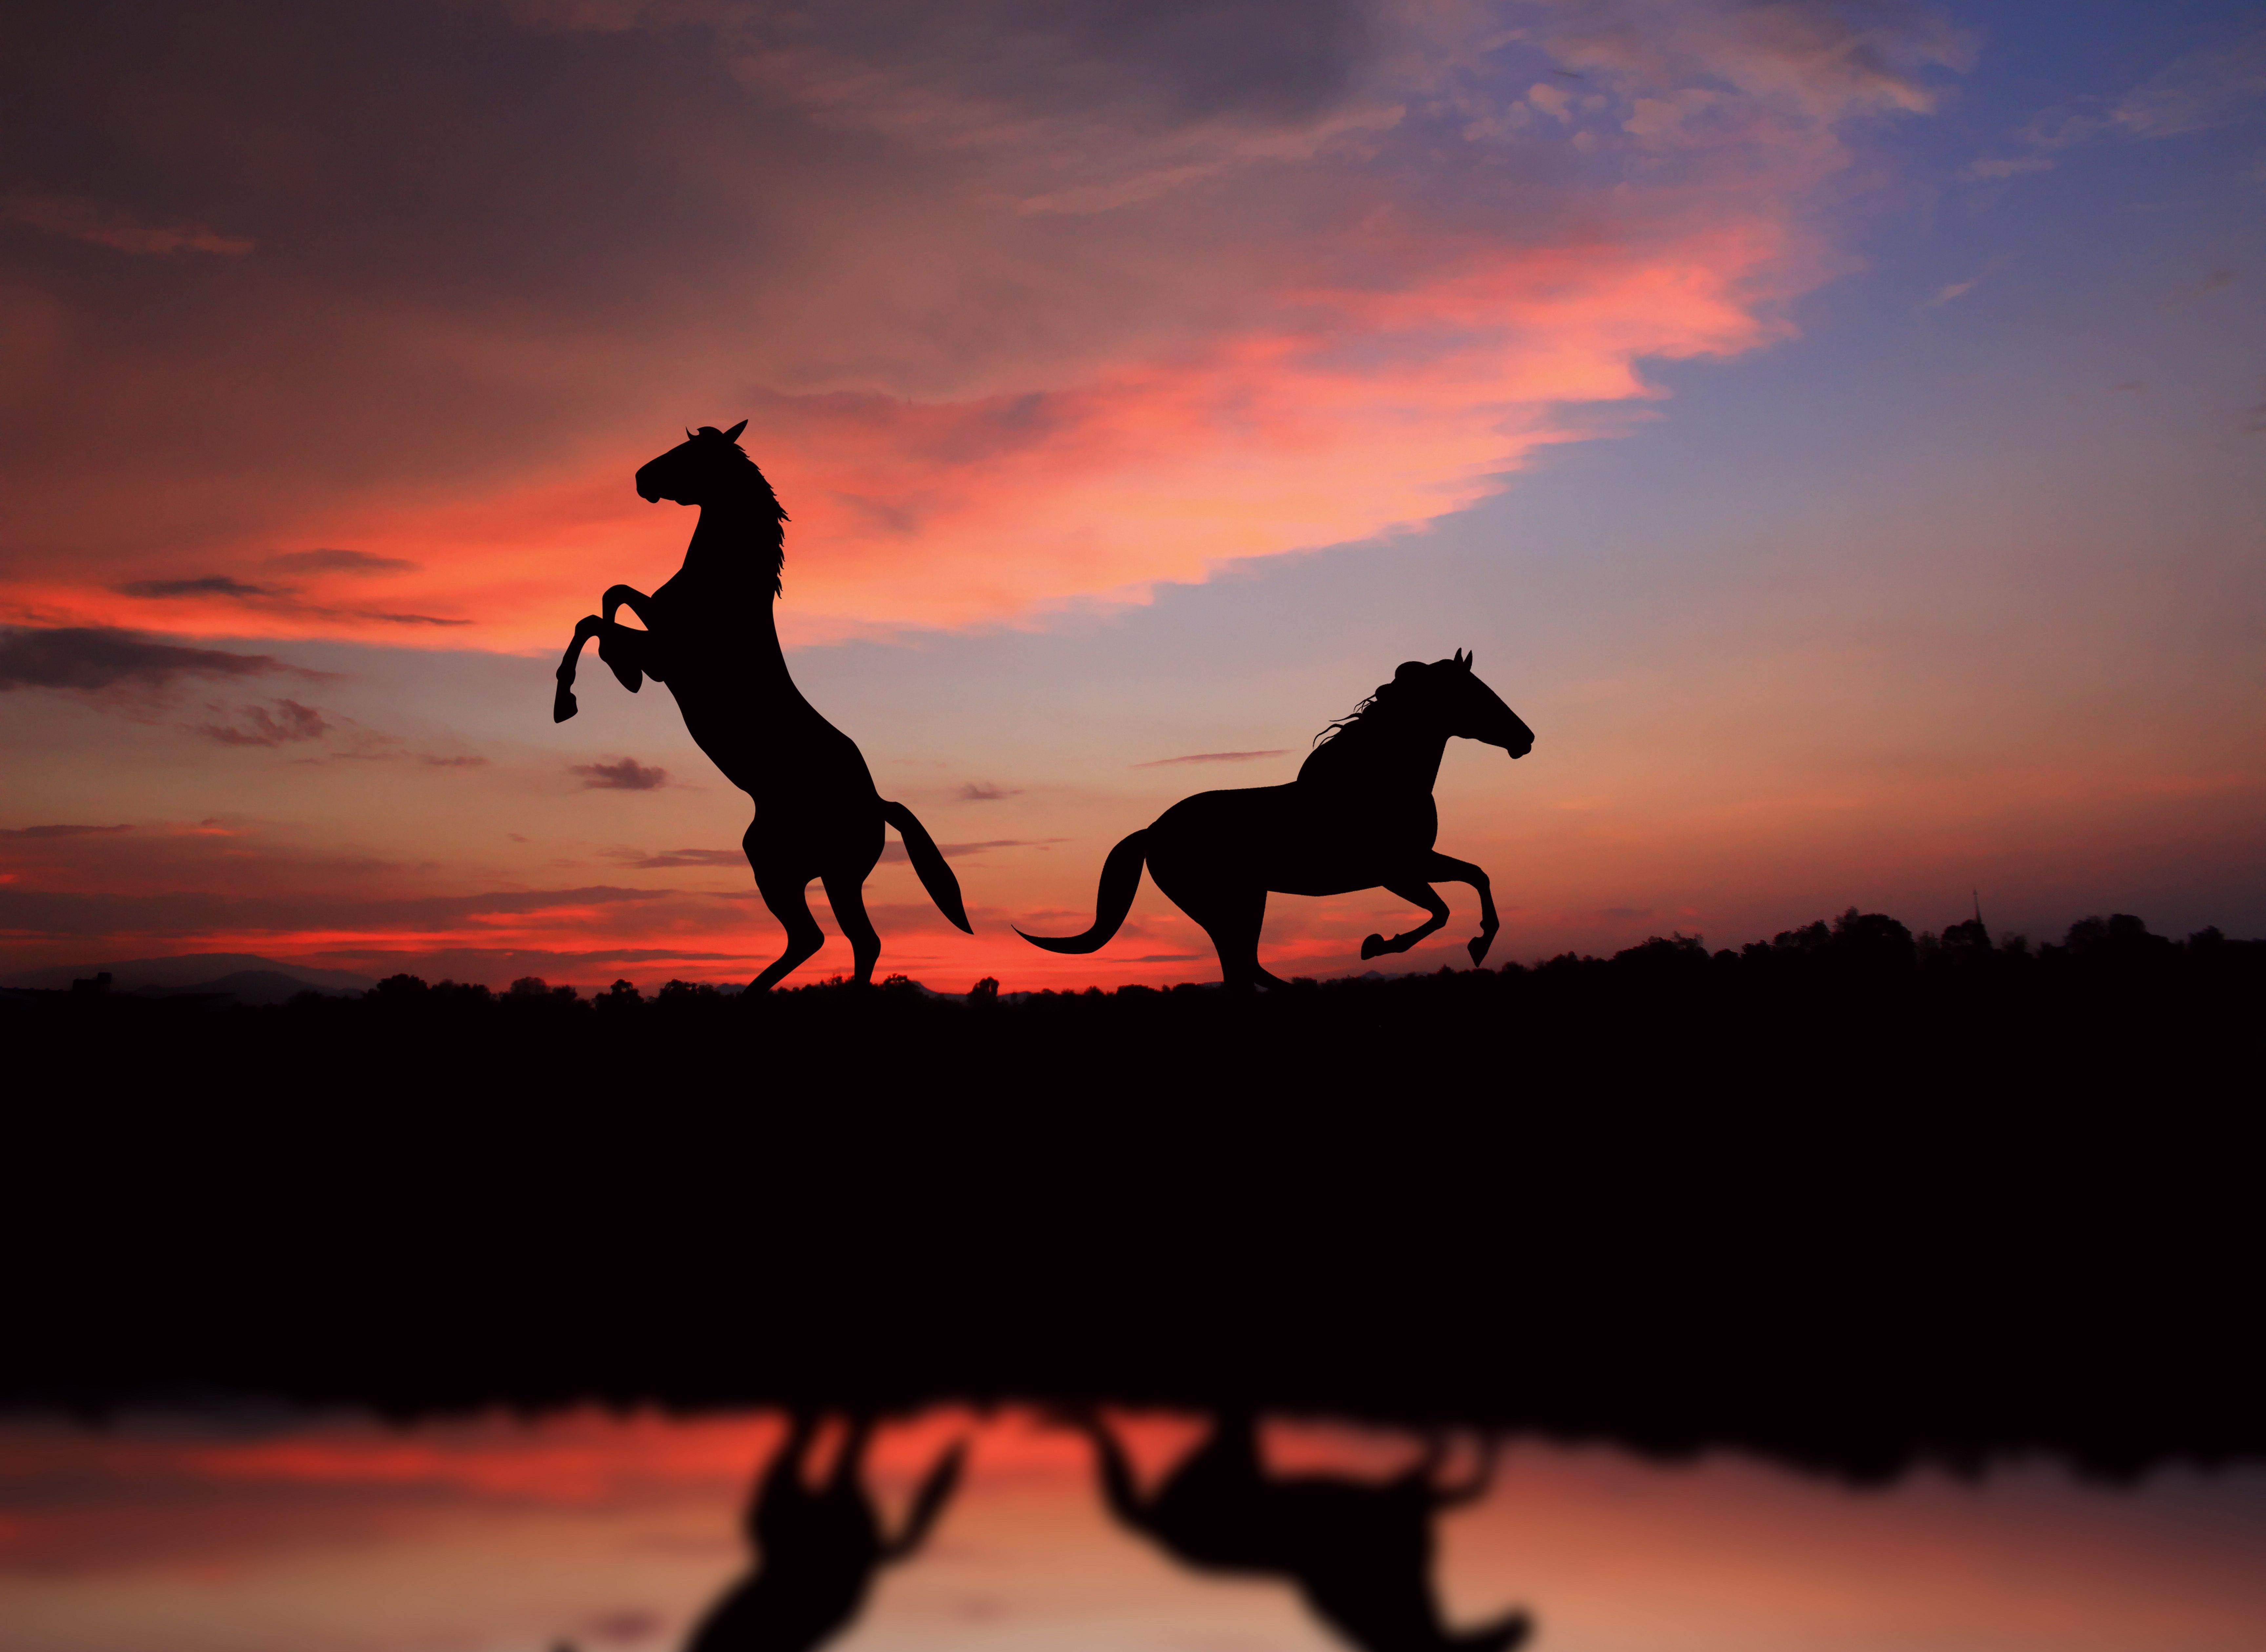 Free Images sunset, horse, reflection, animal Silhouette